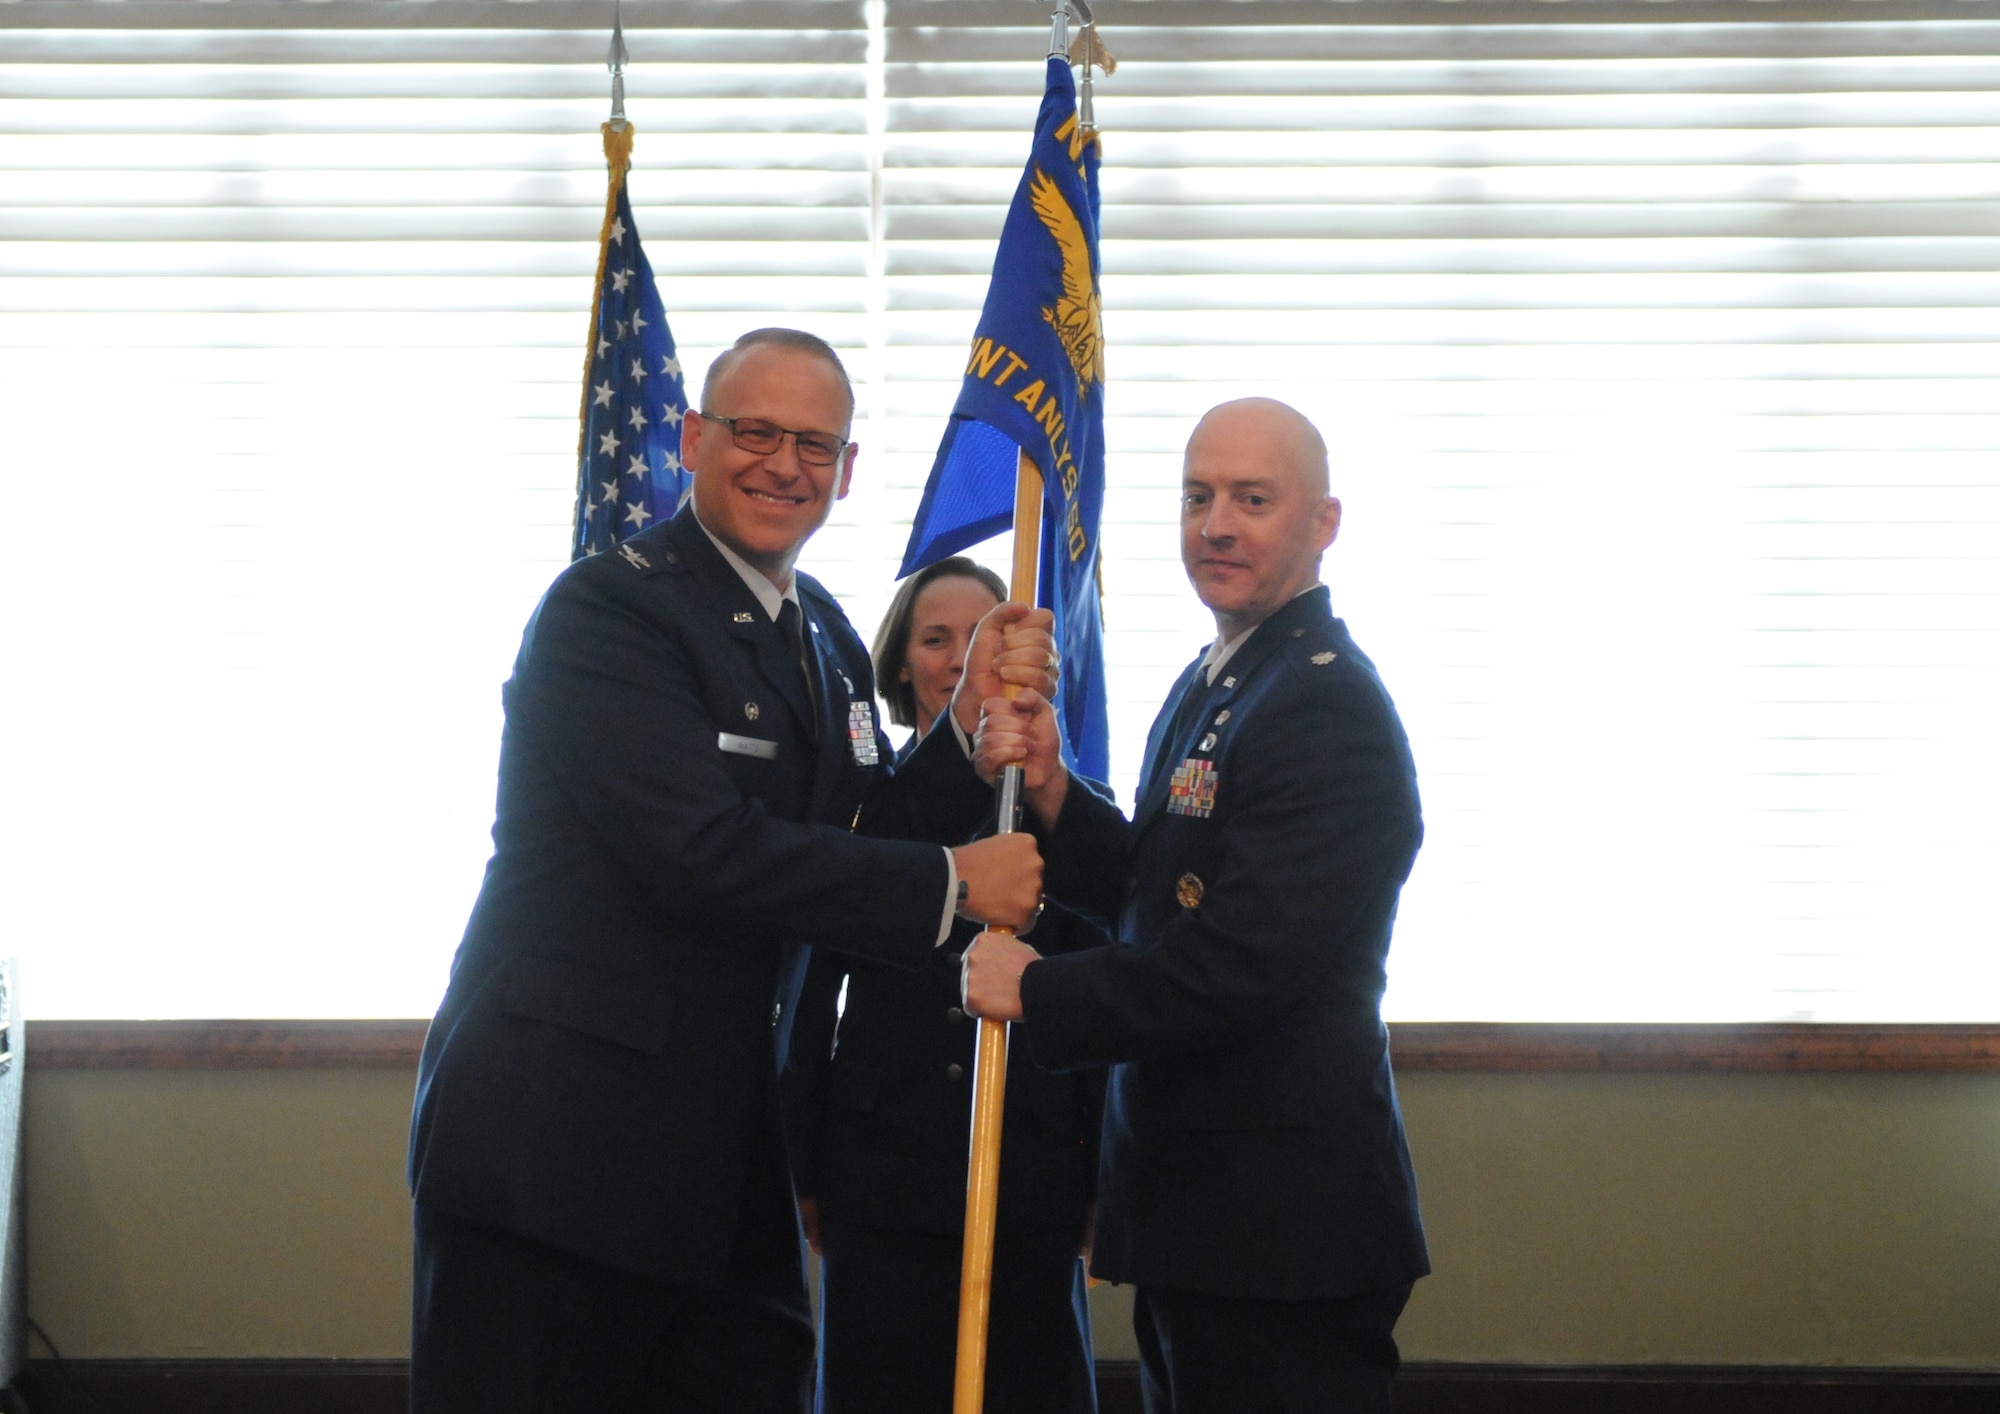 Lt. Col. Jason Seitz accepts command of the Geospatial Intelligence Analysis squadron from Col. Steven Watts, Geospatial and Signatures Intelligence Group, at the Wright-Patterson Club, Wright-Patterson Air Force Base, Ohio, June 2, 2022. GSI creates tailored geospatially-based intelligence and capabilities to deliver decision advantage for the warfighter, policymaker, and weapon acquisition community. (U.S. Air Force photo by Staff Sergeant Caleb House)